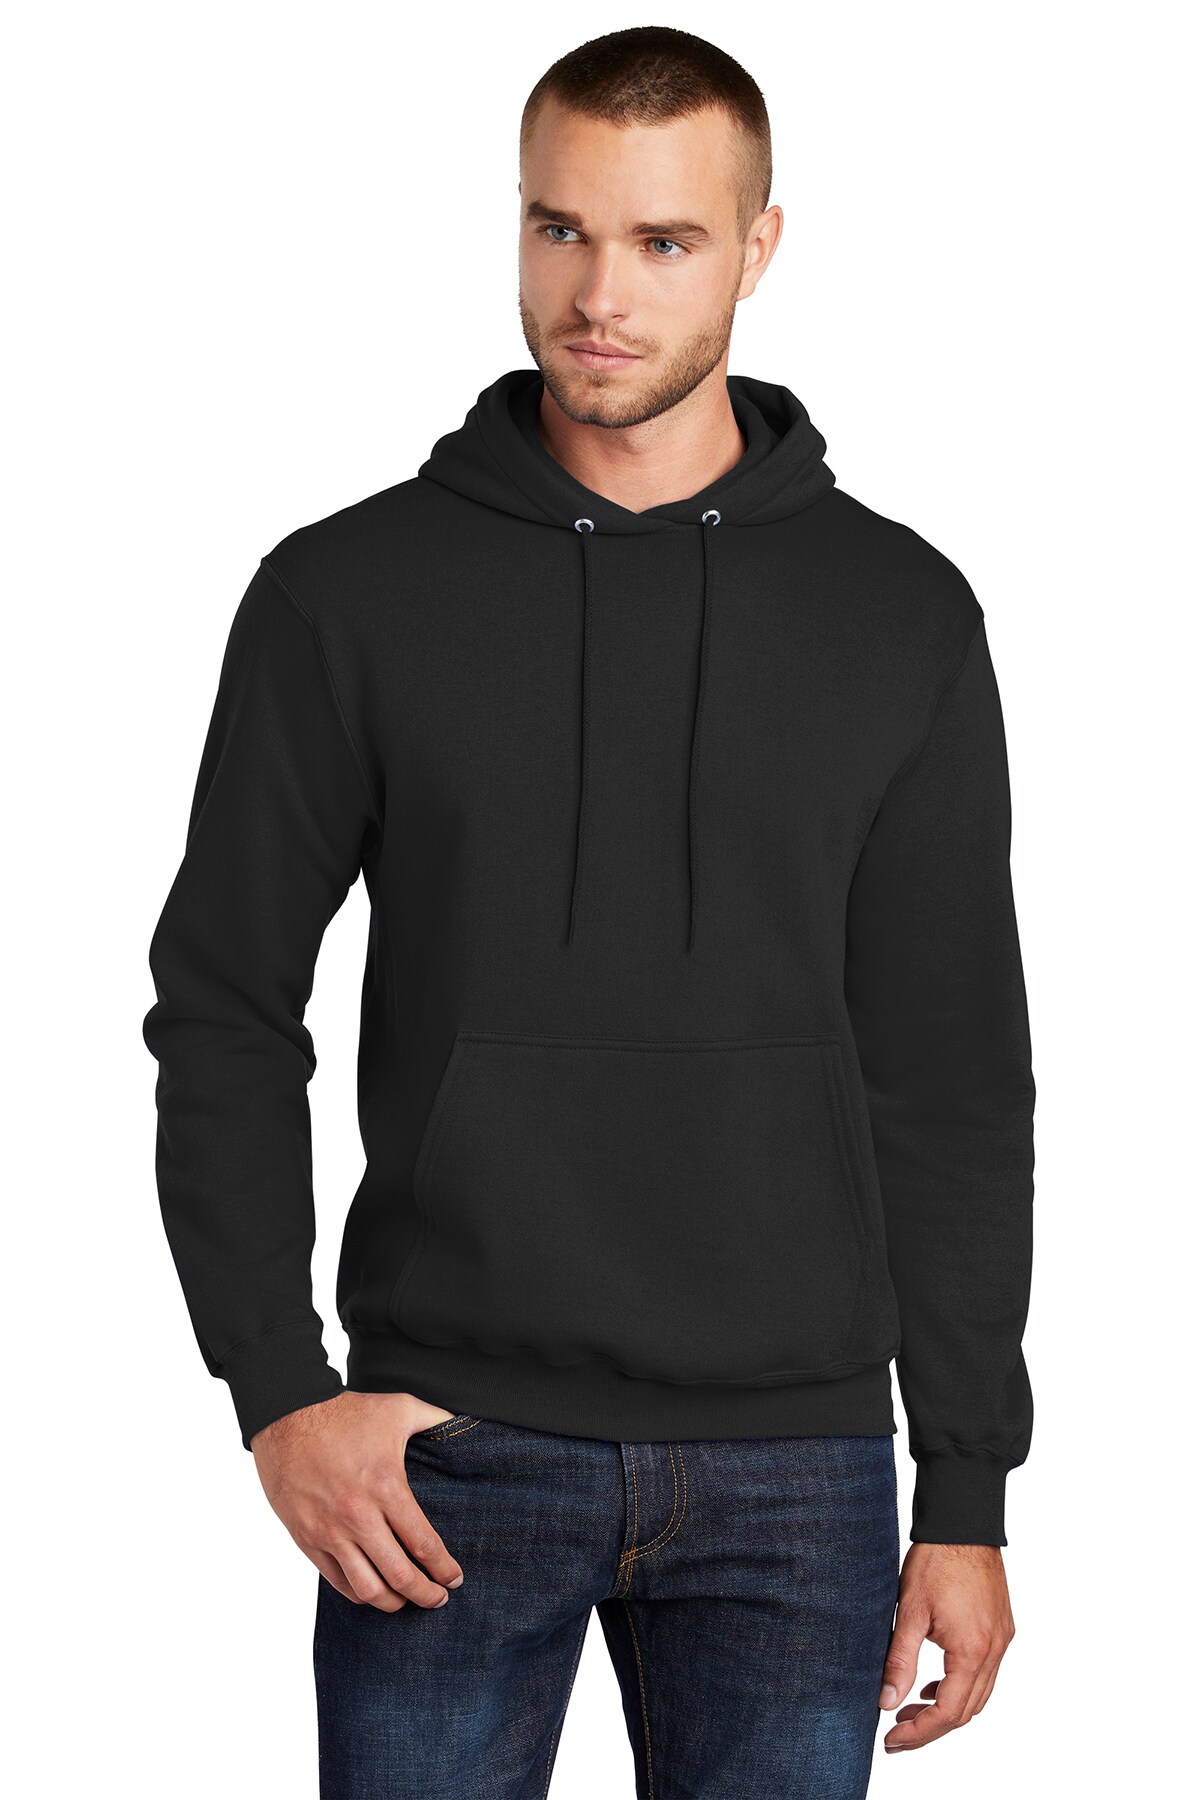 Men's Fleece Pullover Hooded Hoodie Sweatshirt is a popular and comfortable  choice for casual wear With softness and warmth felling